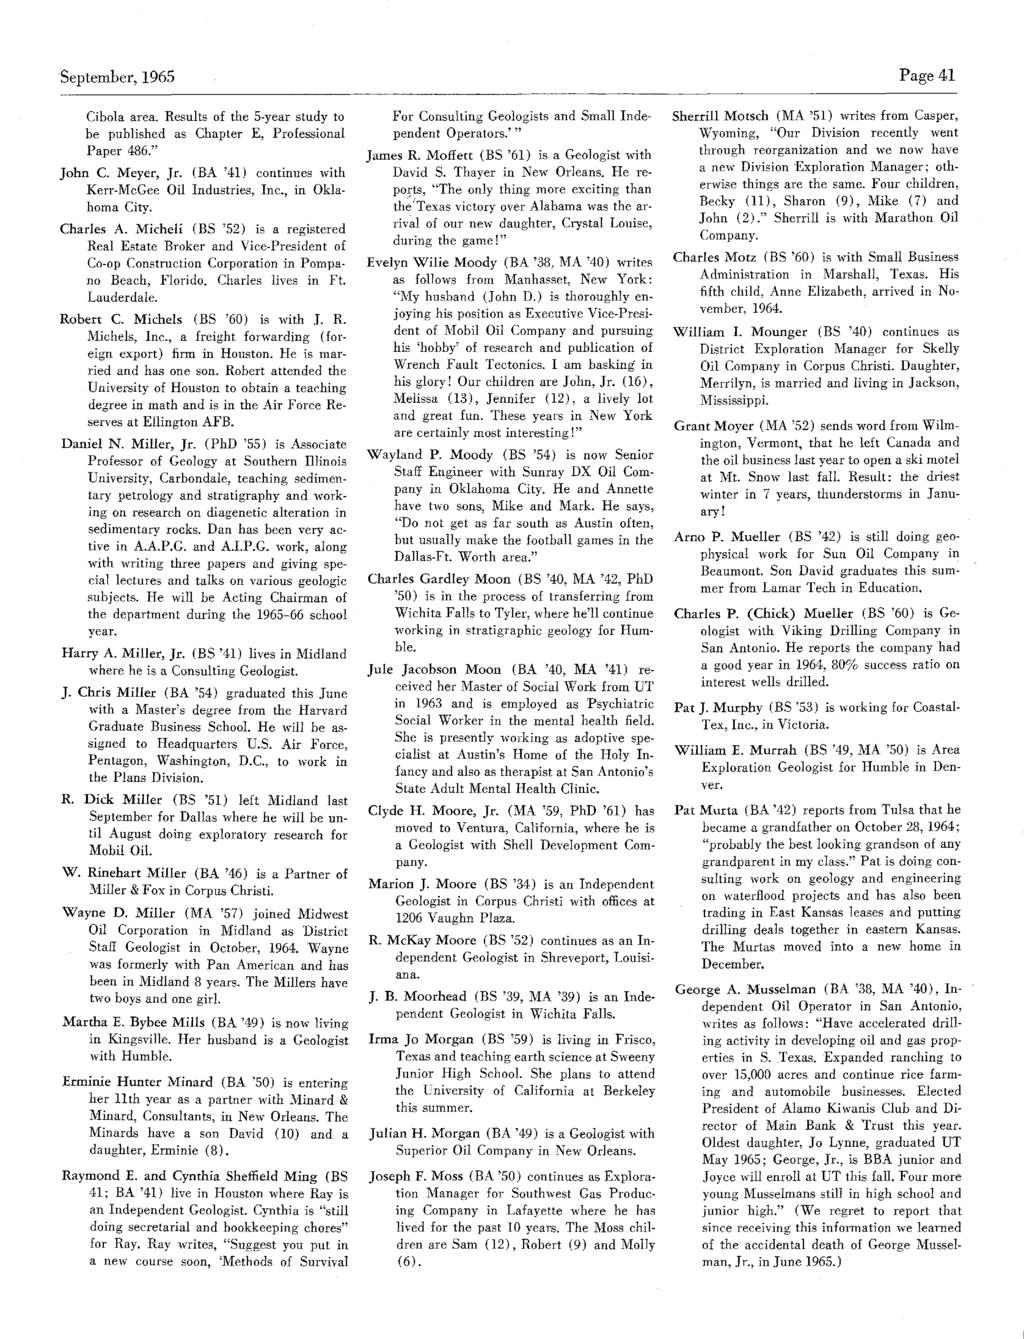 September,1965 Page 41 Cibolaarea. Results of the 5-year study to be published as Chapter E, Professional Paper 486." John C. Meyer, Jr. (BA '41) continues with Kerr-McGee Oil Industries, Inc.